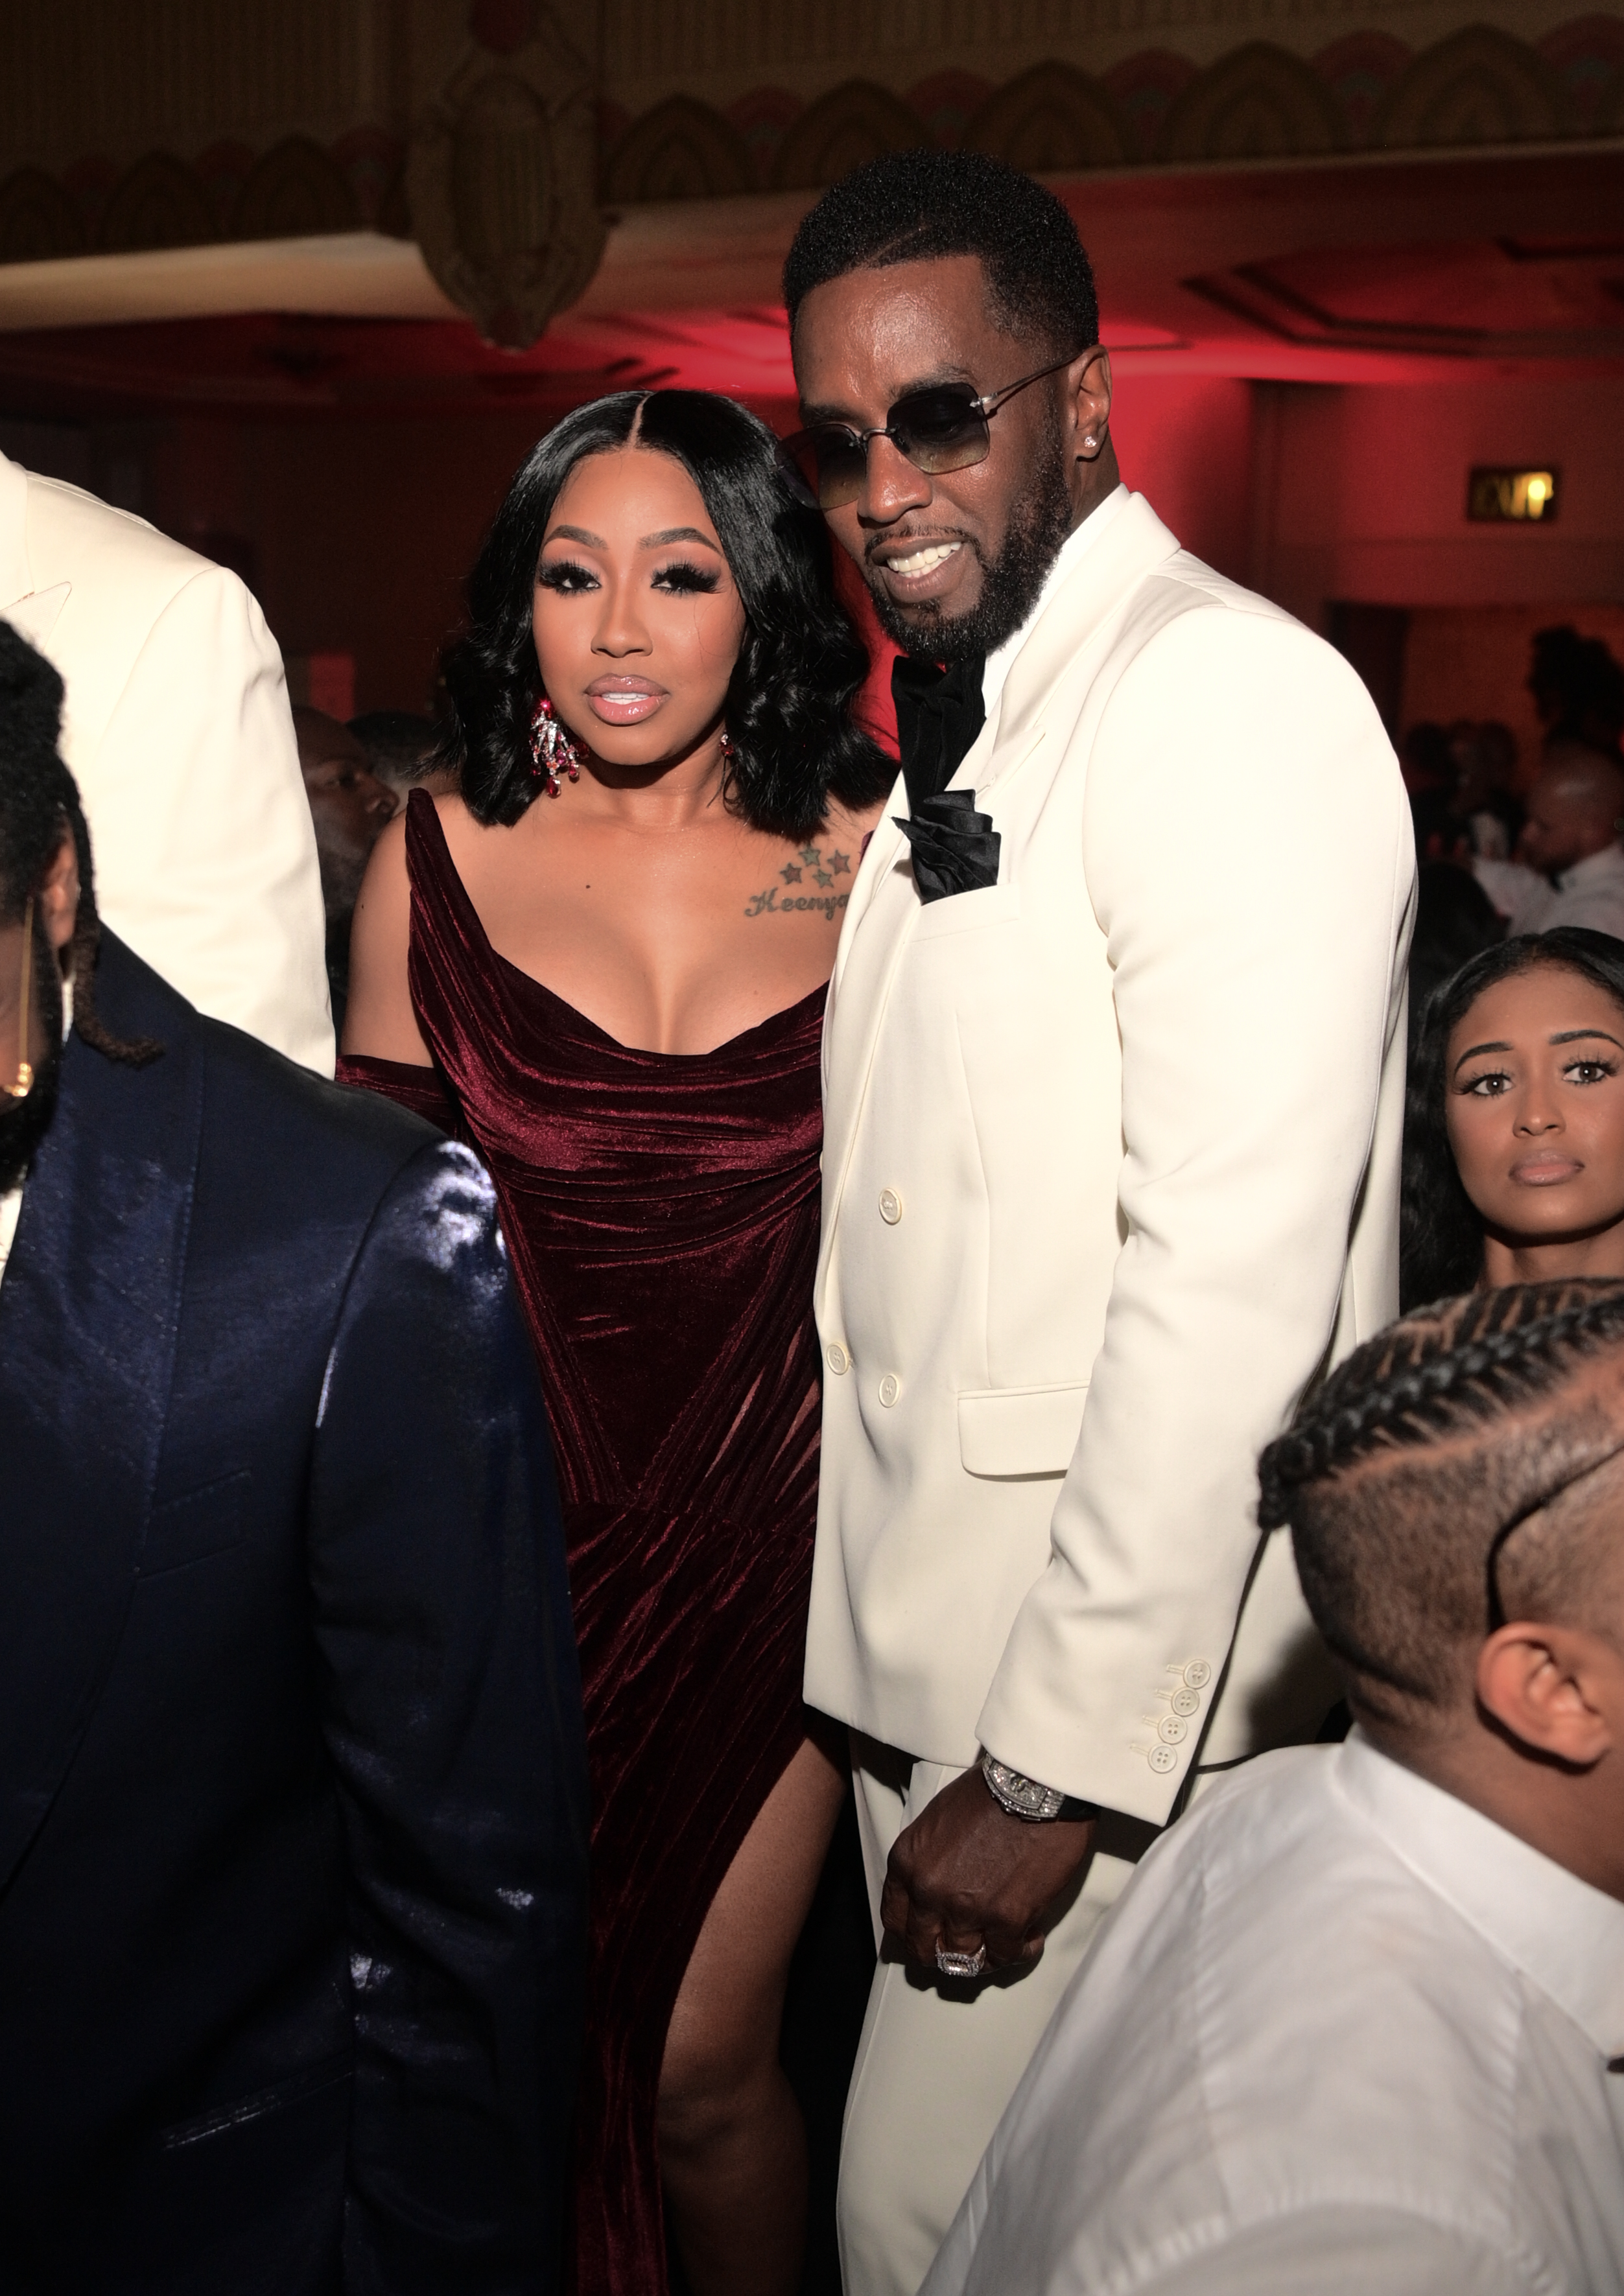 <p>In June 2022, Sean "<a href="https://www.wonderwall.com/celebrity/profiles/overview/diddy-273.article">Diddy</a>" Combs confirmed that he's dating Yung Miami, one-half of the duo City Girls -- who's 24 years his junior. The music stars were first romantically linked in the summer of 2021 when he was 51 and she was 27. <a href="https://www.wonderwall.com/celebrity/profiles/overview/diddy-273.article">Diddy</a> admitted their involvement when he was a guest on her show "Caresha Please," telling her after she asked him, "Like, what's your relationship status? … So what we is?" that he considers them to be "dating. We go have dates, and we're friends. We go to exotic locations, we have great times, we go to strip clubs, church…" When she prompted him to describe what he likes about her, he said, "You're authentic, you're one of the realest people I've ever met … you're a great mother and a great friend. And we just have a good time, you know? You're the funnest."</p>